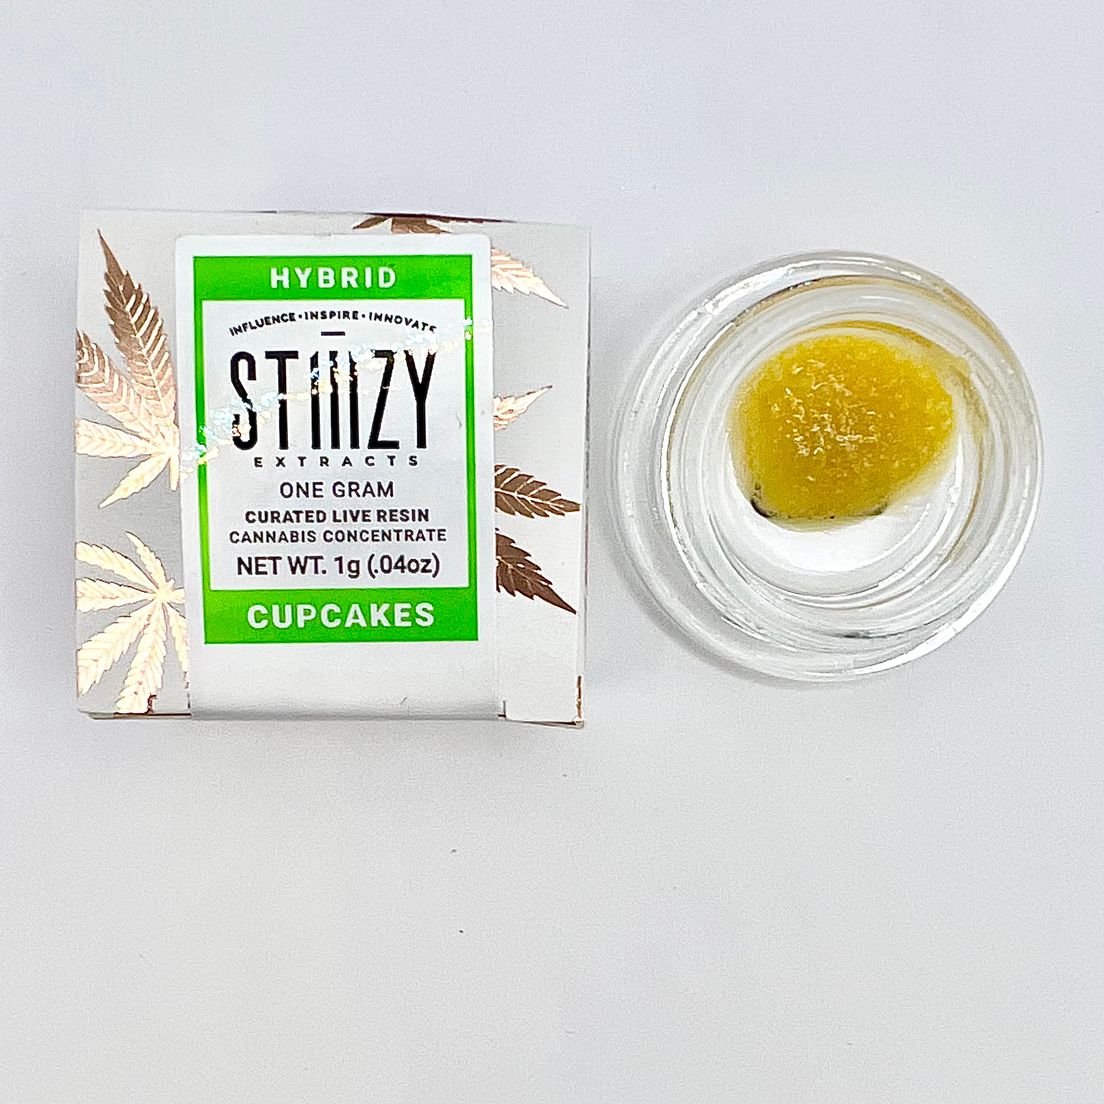 *PRE-ORDER ONLY BLOWOUT DEAL! $25 1g CUPCAKES (Hybrid) Live Resin - Stiiizy